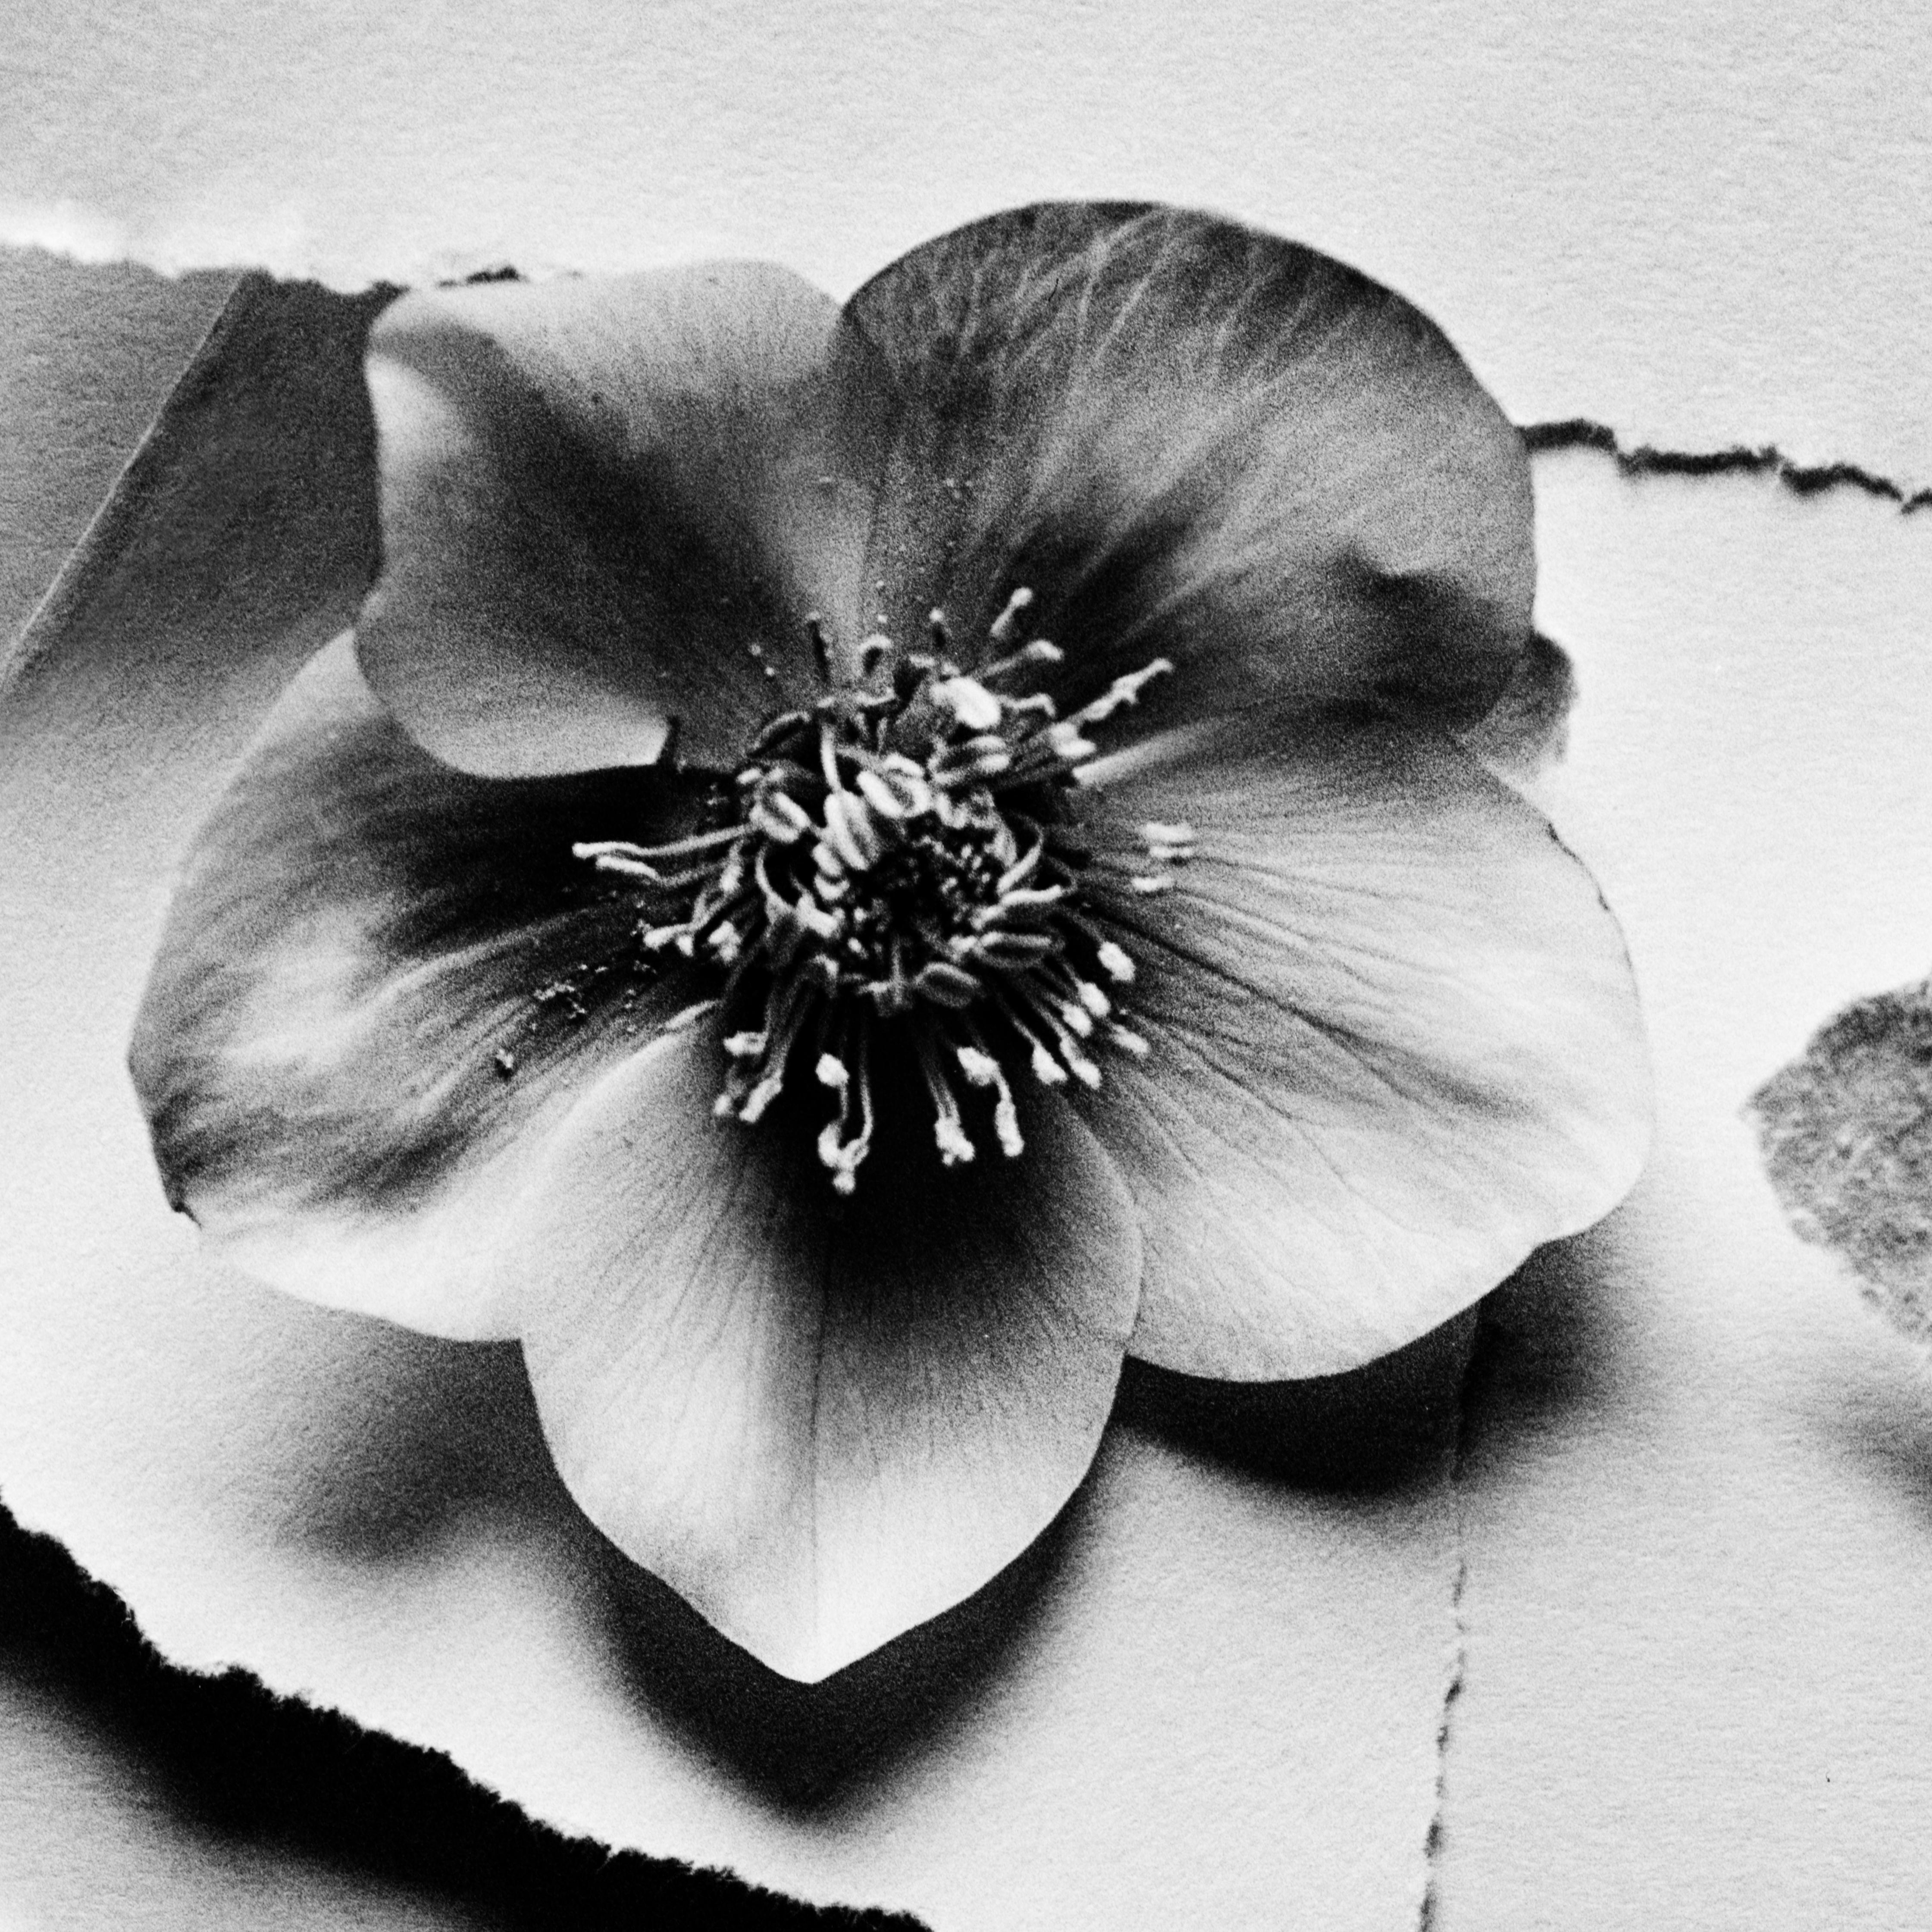 Black Hellebore - analogue black and white floral photography - Contemporary Photograph by Ugne Pouwell